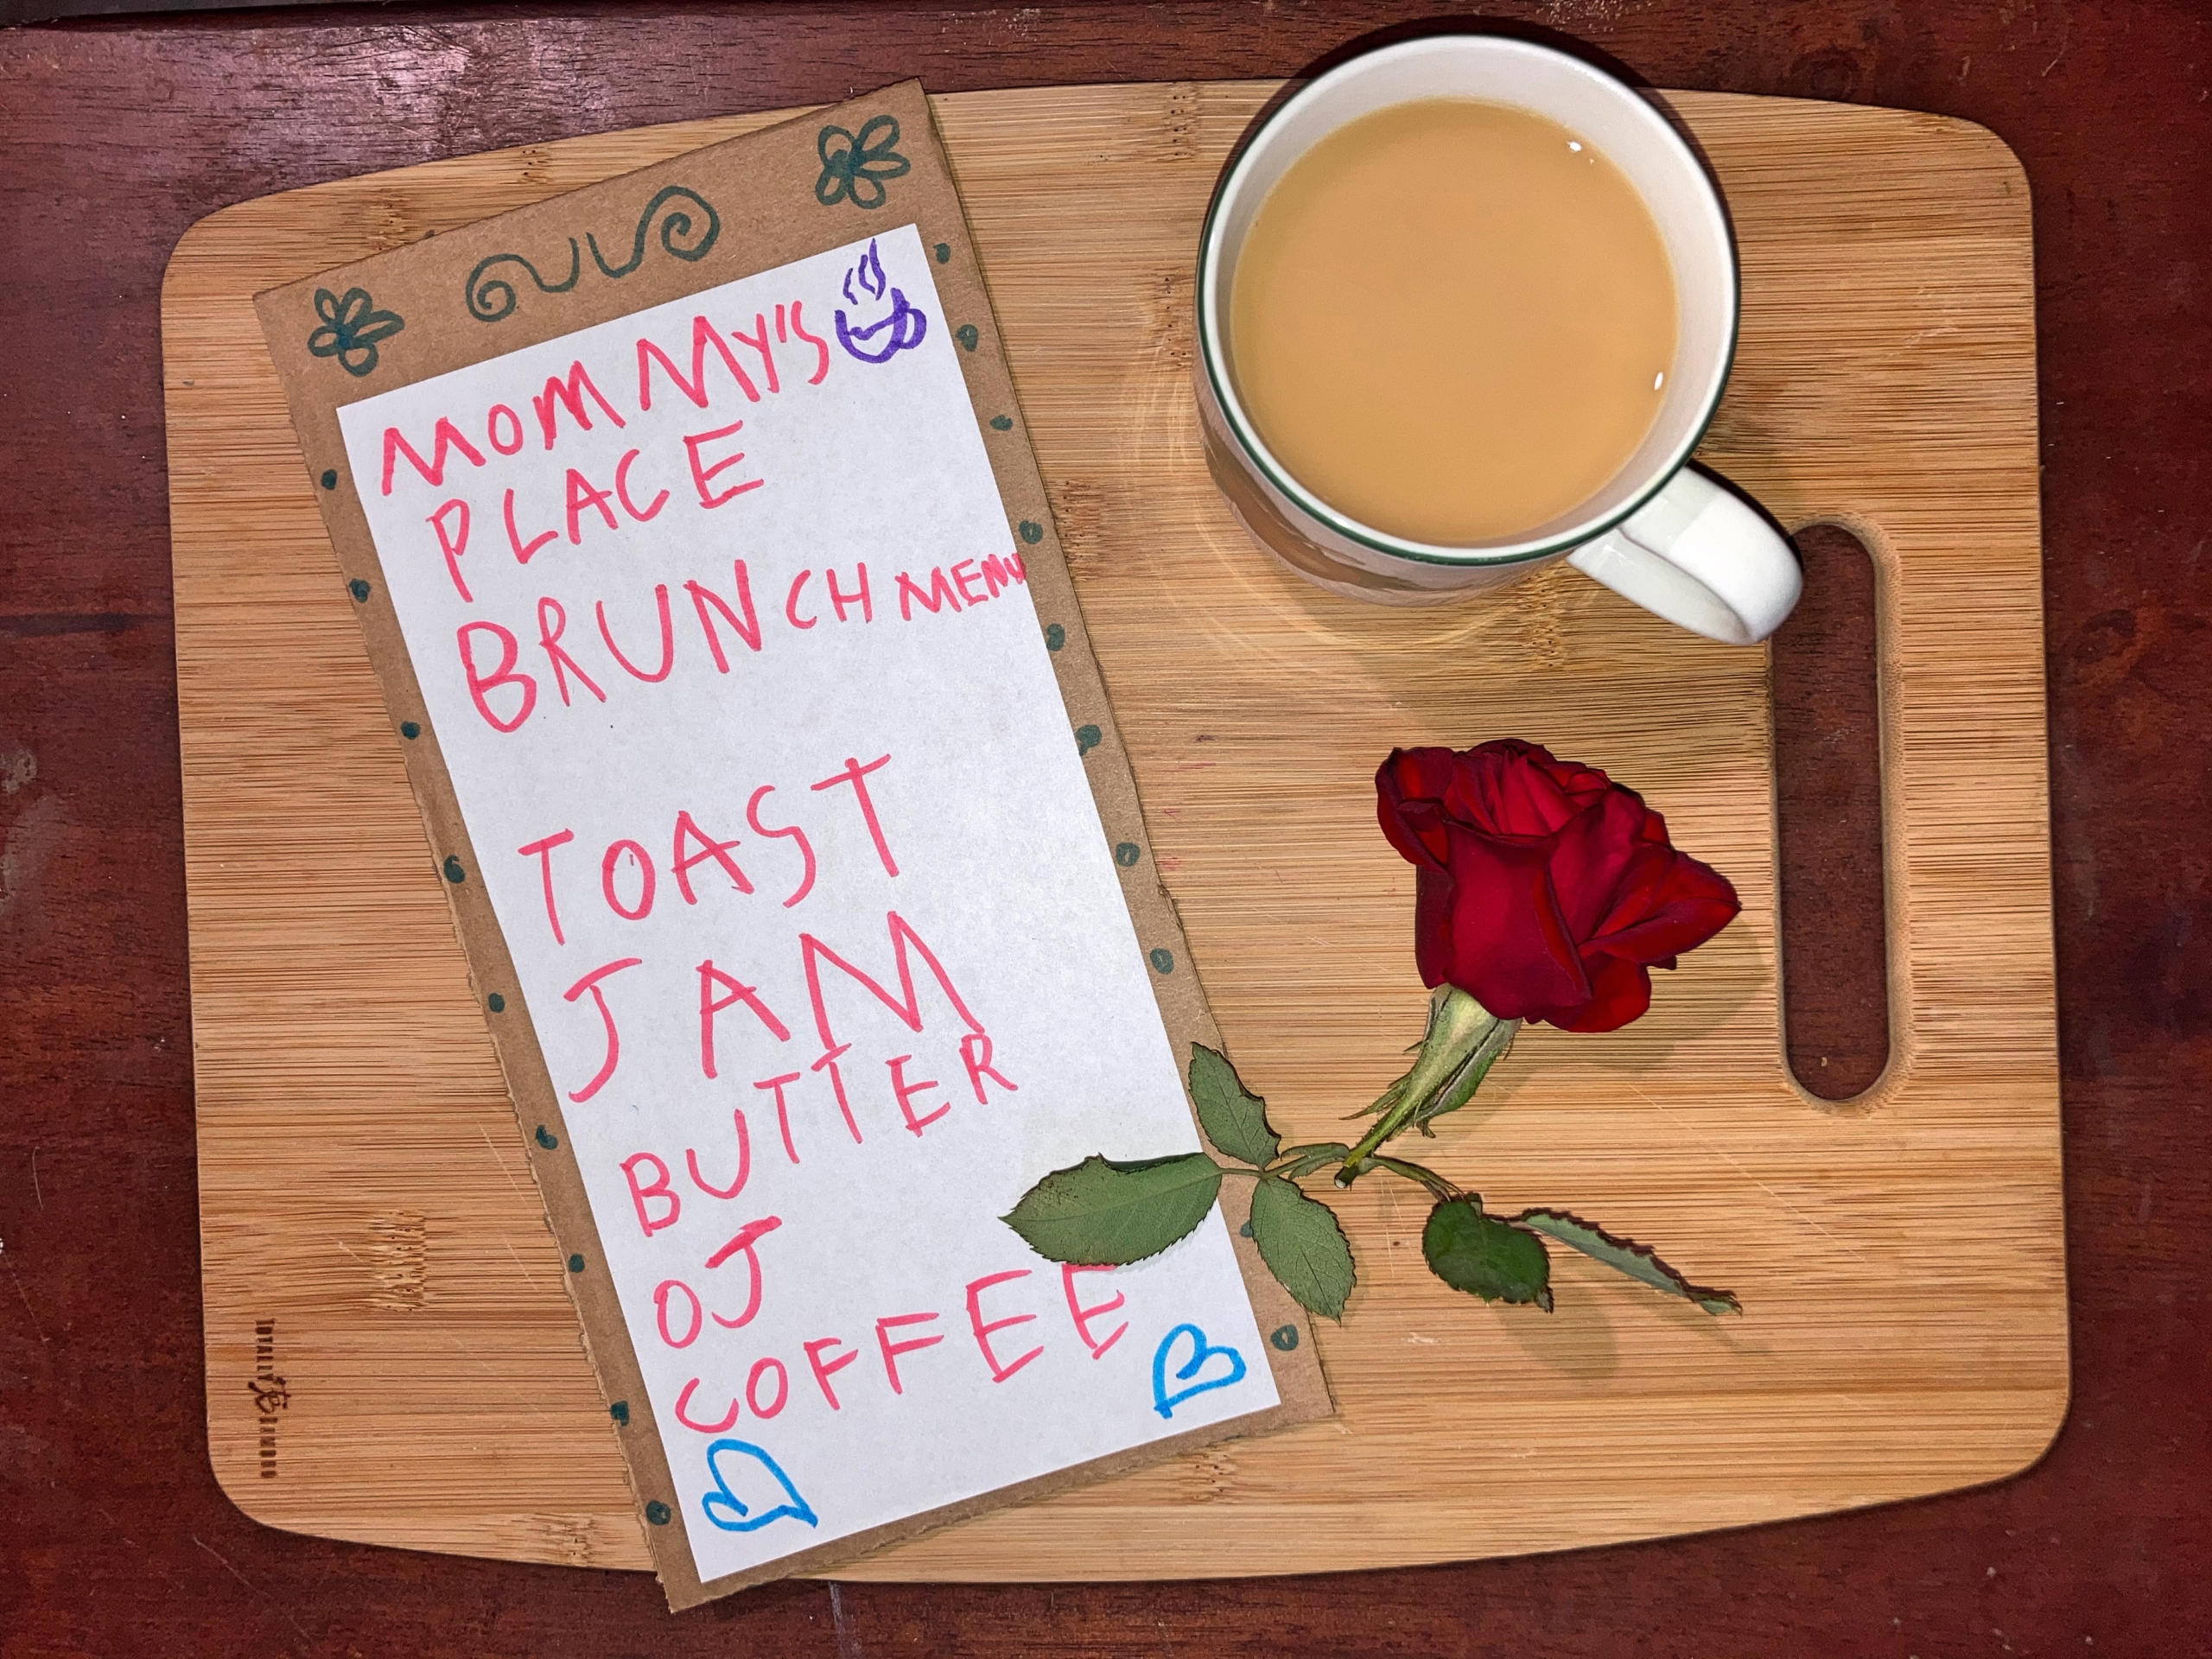 Cup of coffee, menu, and rose sitting on breakfast tray